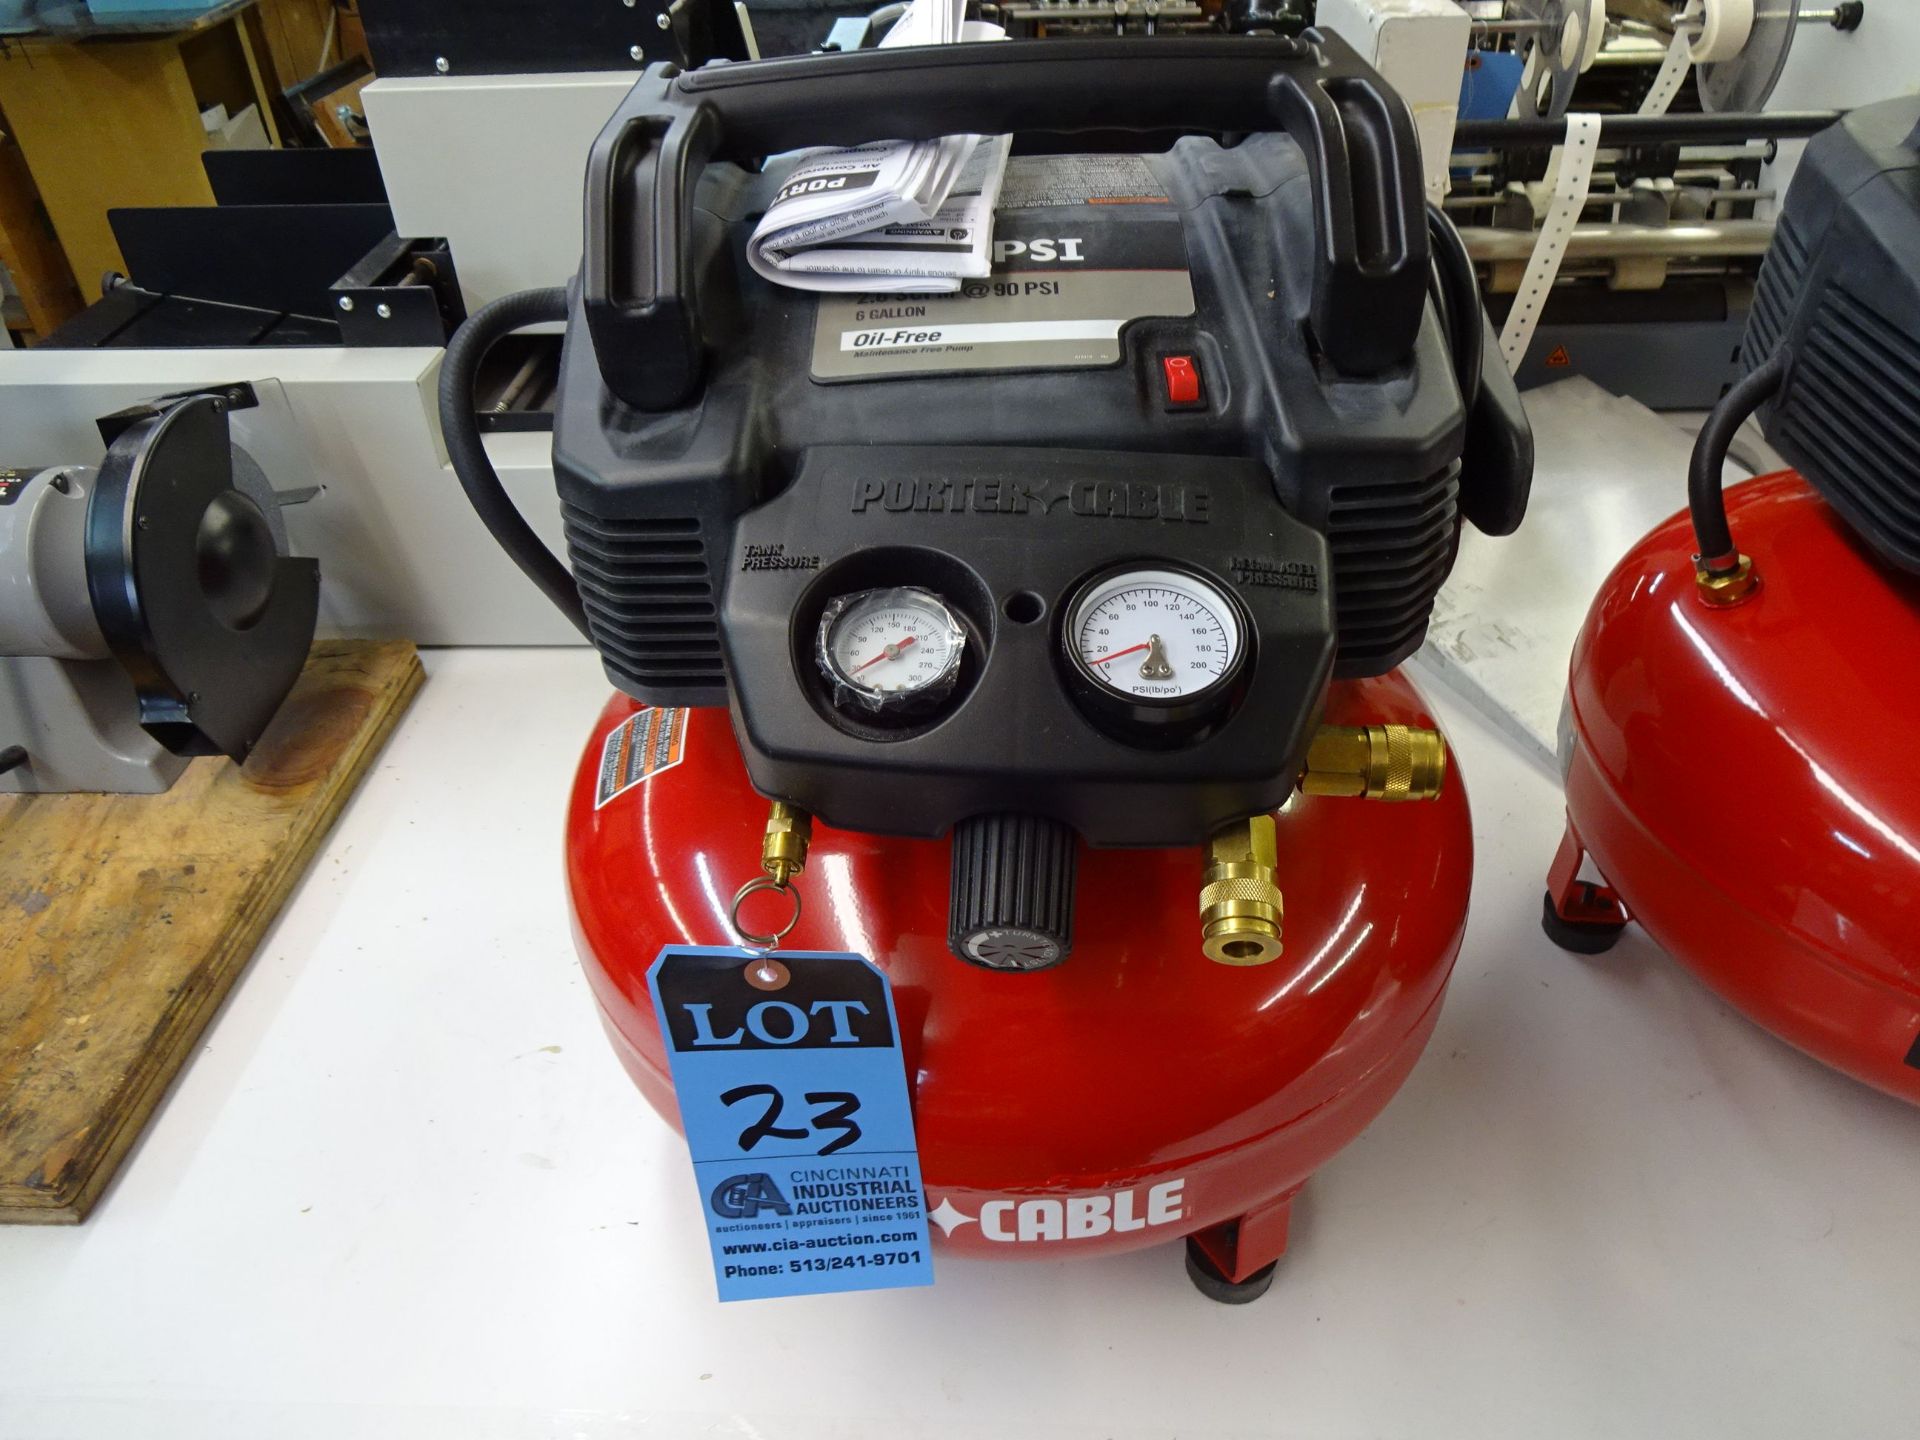 150 PSI PORTER CABLE 2.6 SCFM PANCAKE CYLINDER OIL FREE AIR COMPRESSOR (NOT IN SERVICE, PARTS ONLY)